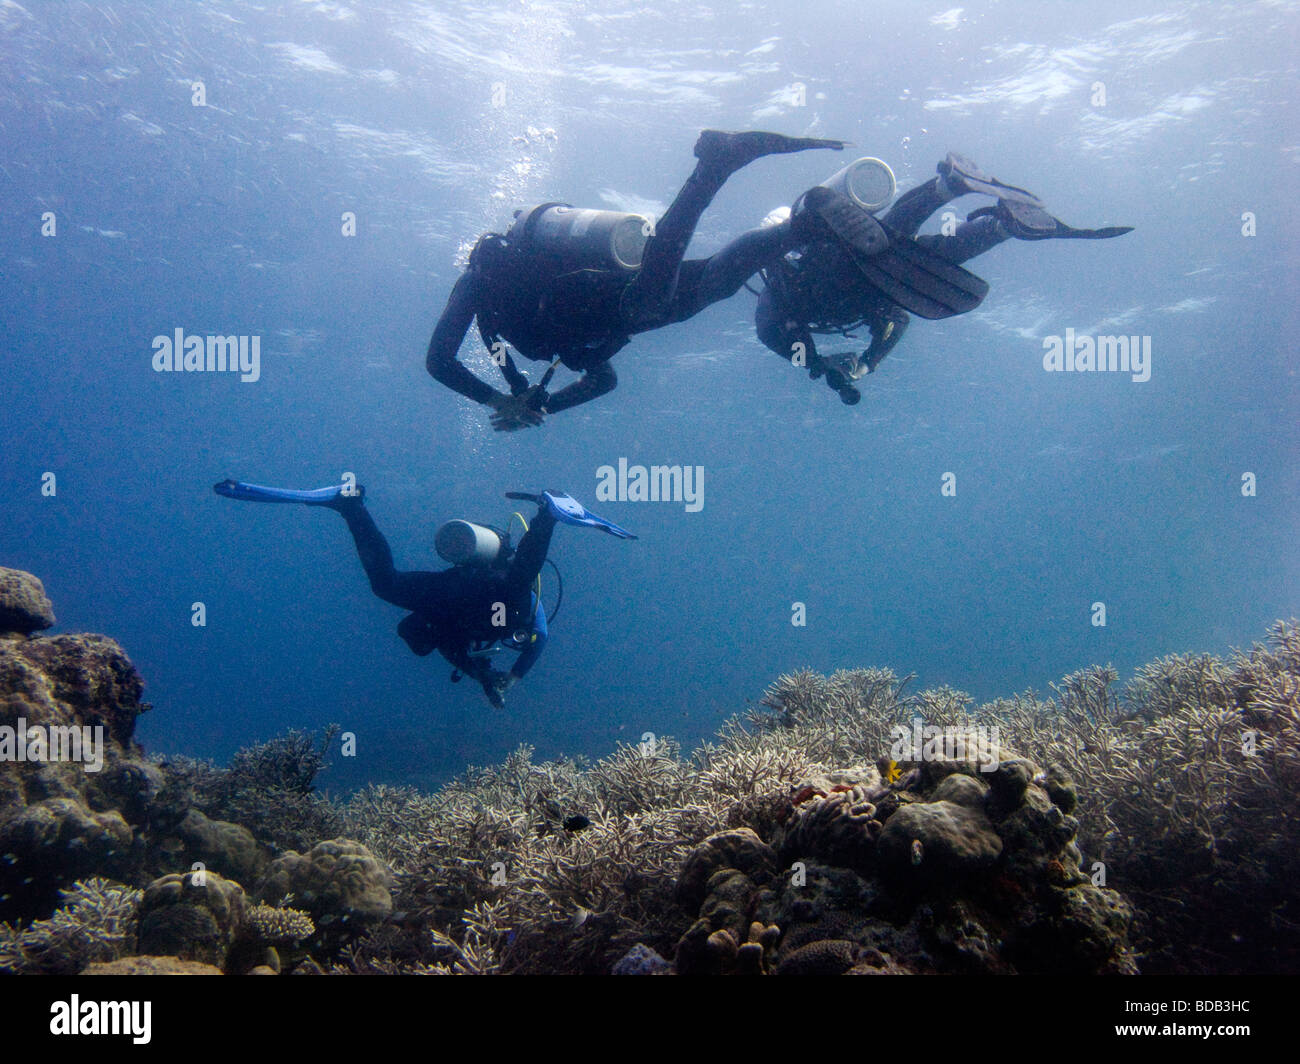 Indonesia Sulawesi Wakatobi National Park underwater young scuba divers learning to dive underwater Stock Photo